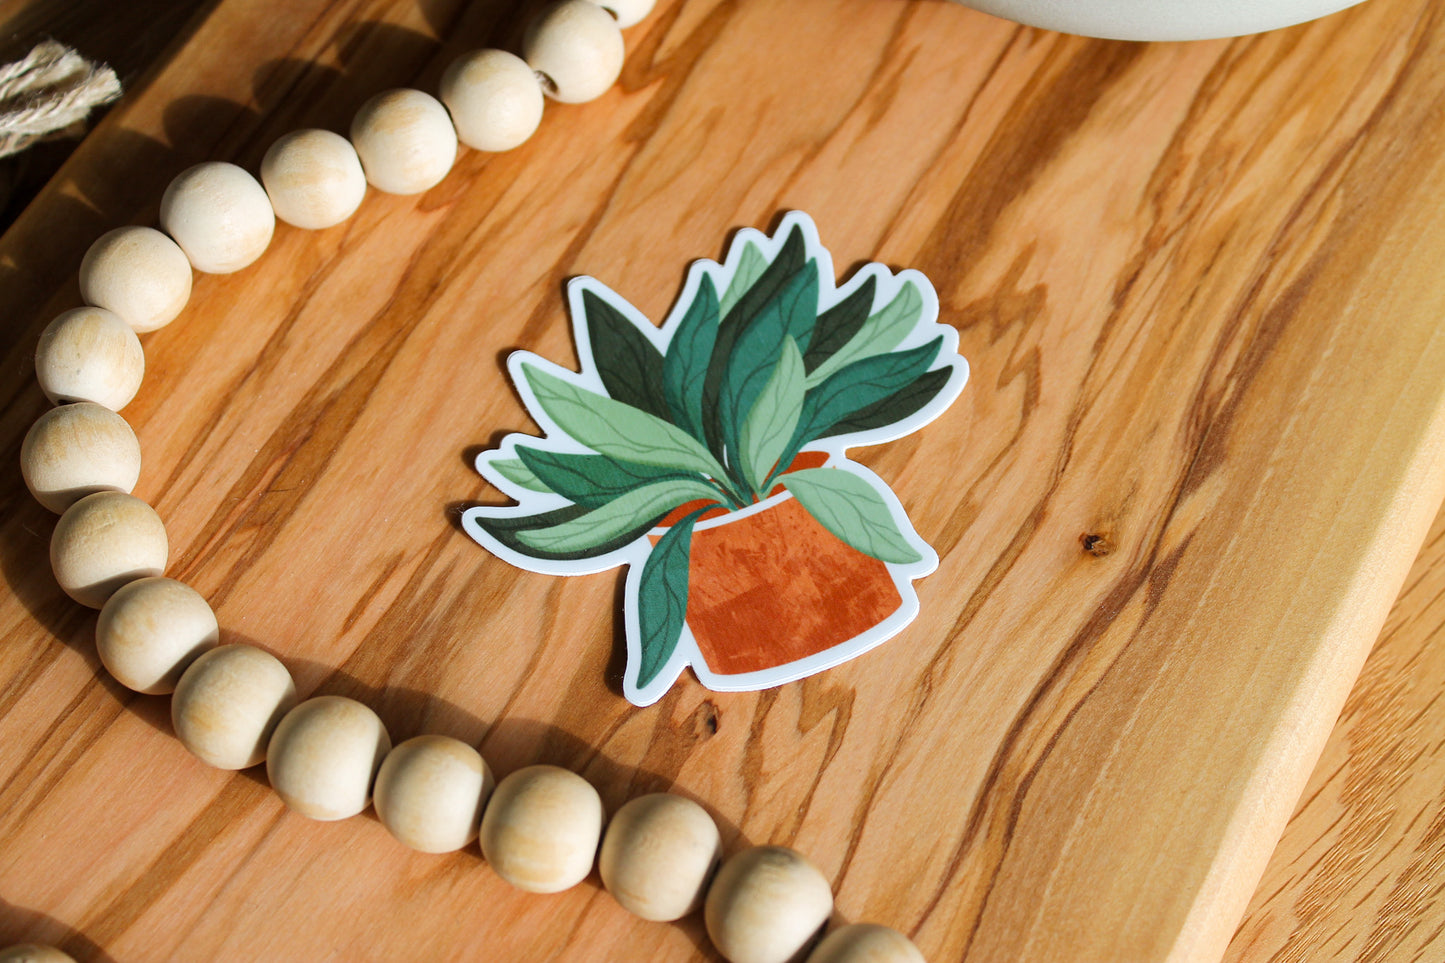 Potted Plant Sticker, 3x2.79"